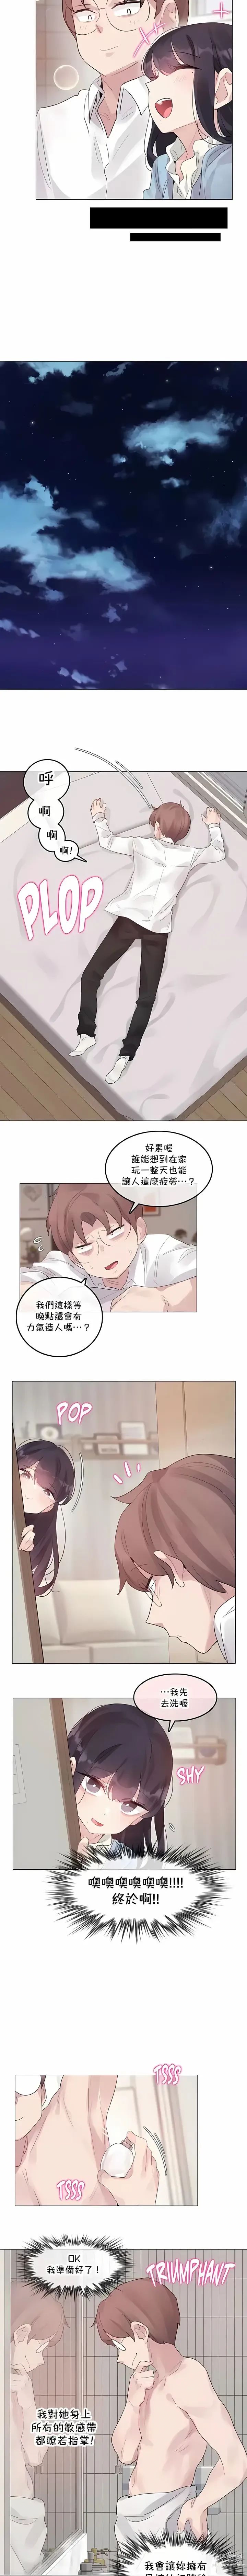 Page 1088 of doujinshi A Pervert's Daily Life 第1-4季 1-144